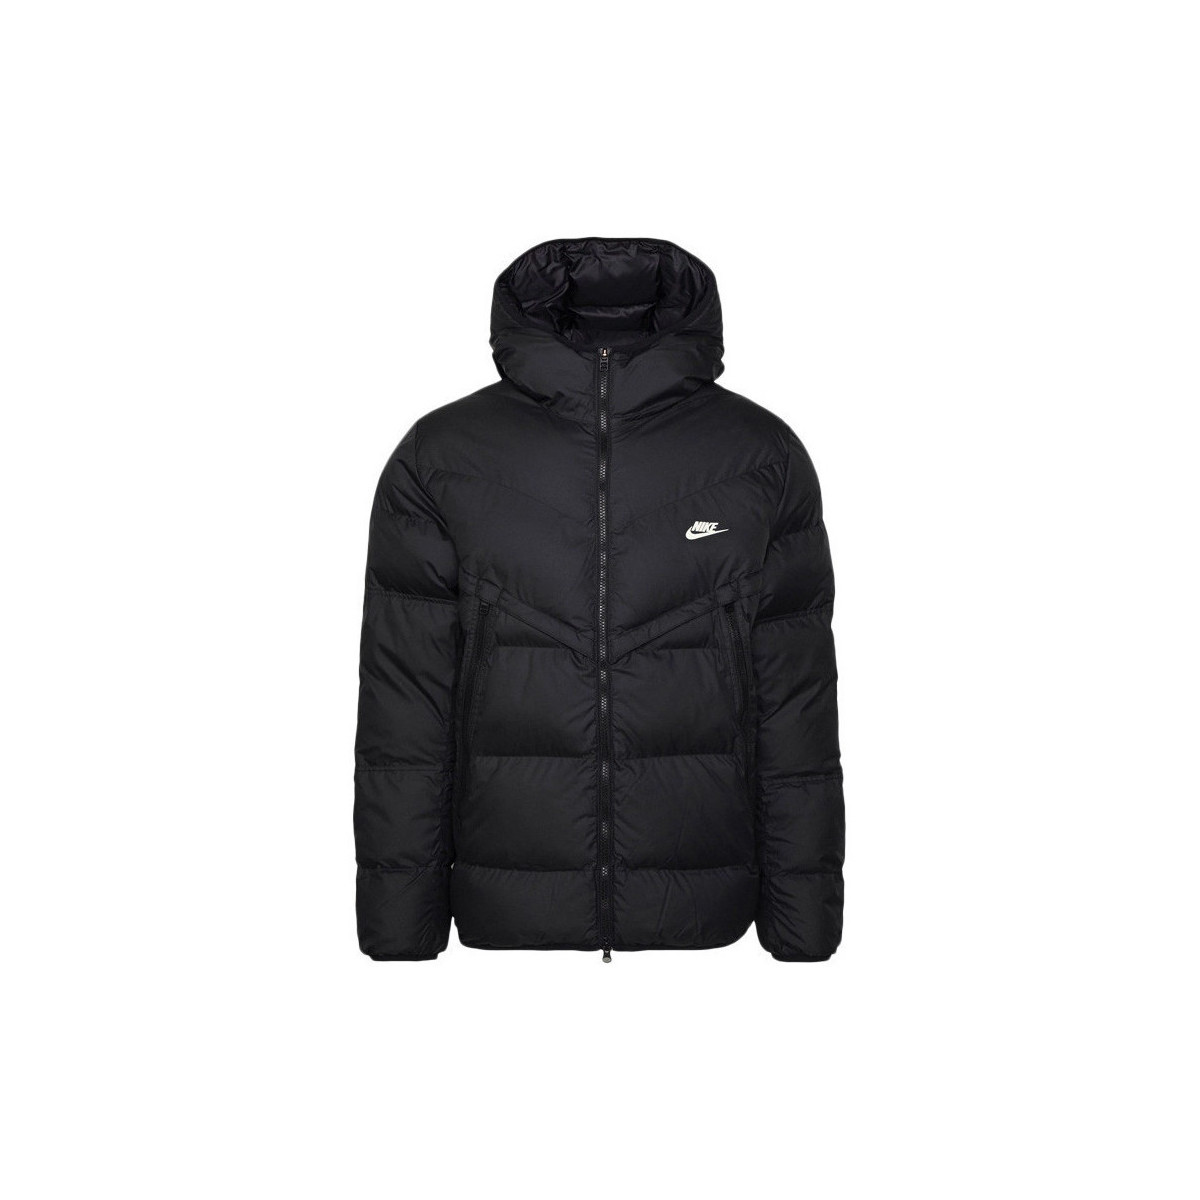 Nike a capuche  STORM FIT WINDRUNNER 24779890 1200 A